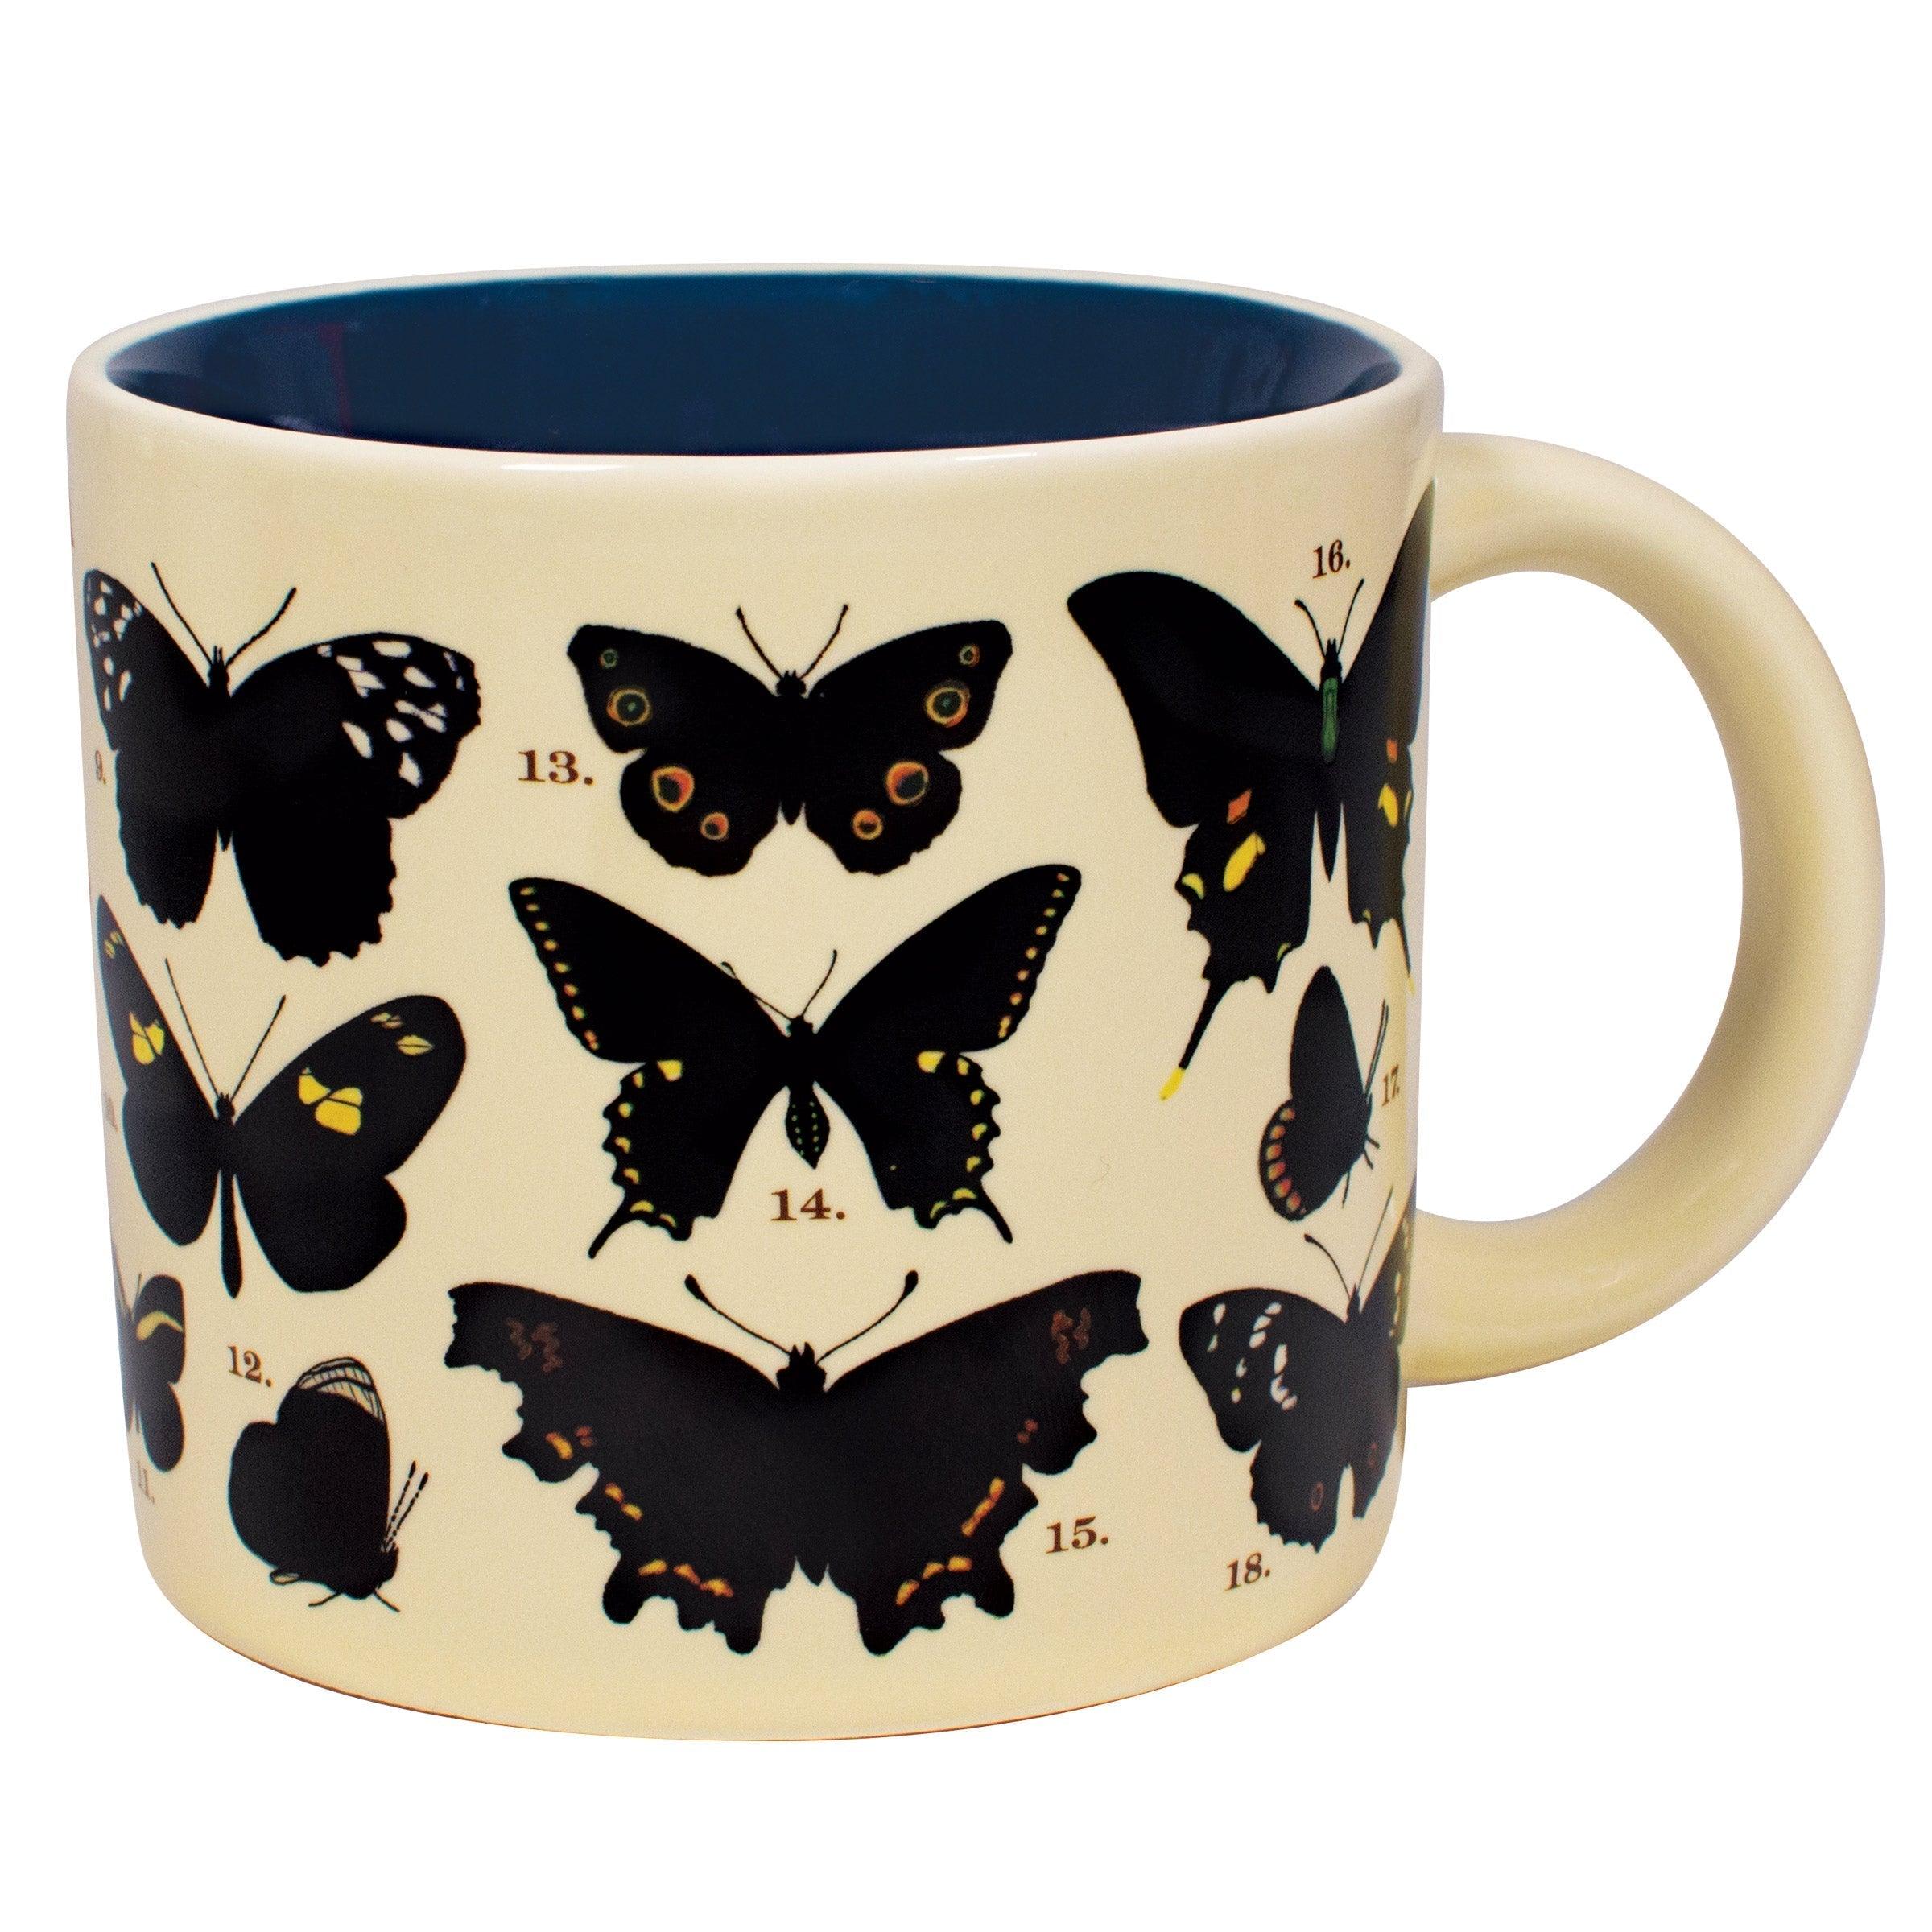 Product photo of Butterflies Heat-Changing Mug, a novelty gift manufactured by The Unemployed Philosophers Guild.